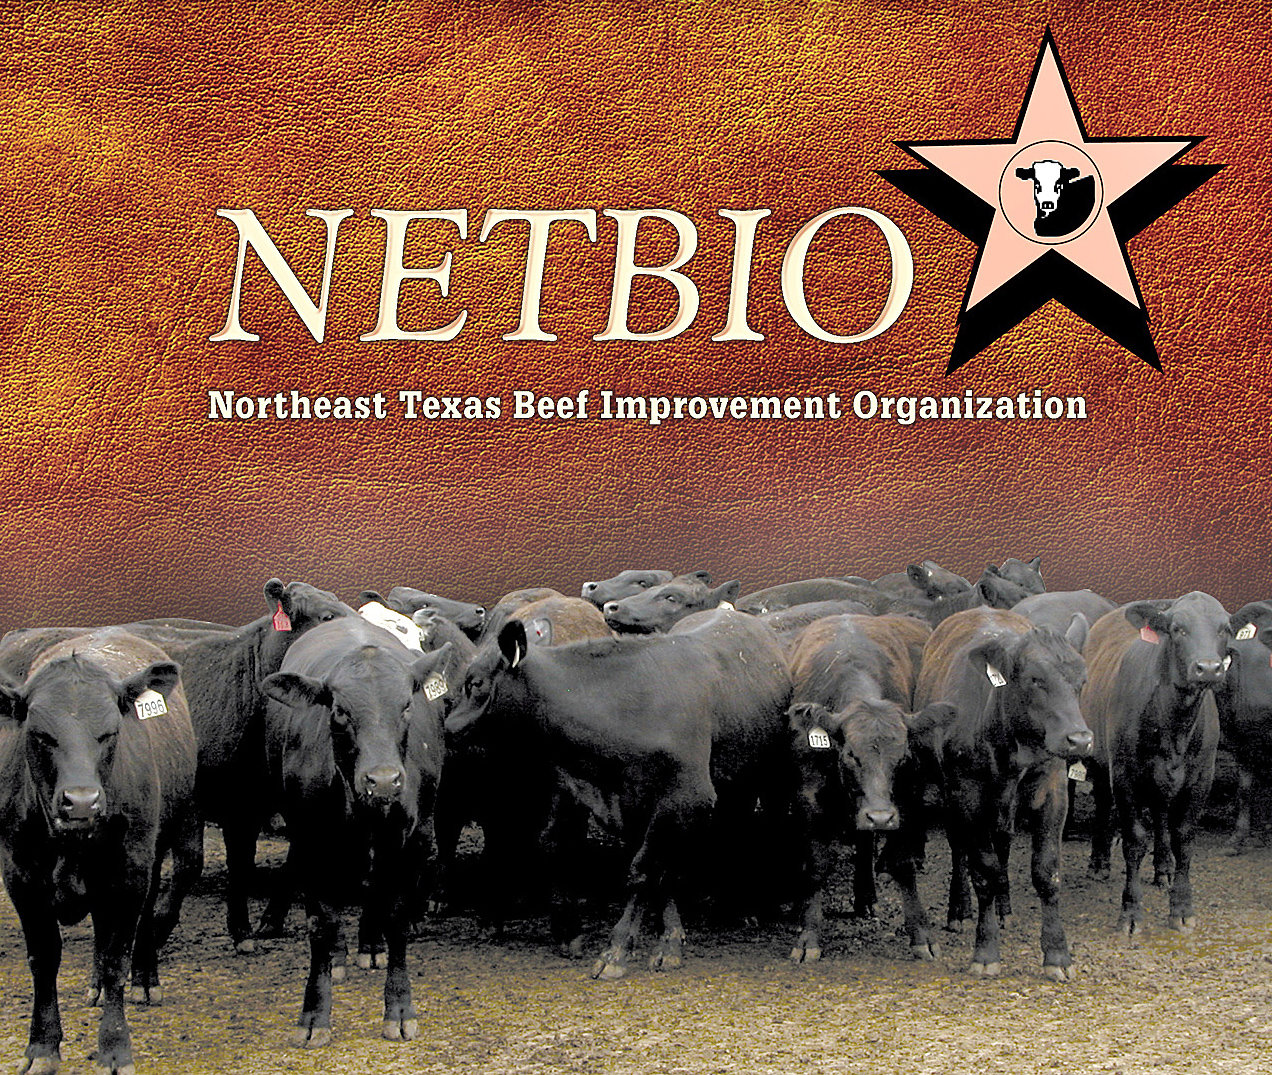 NETBIO changes sale days, weaning requirements